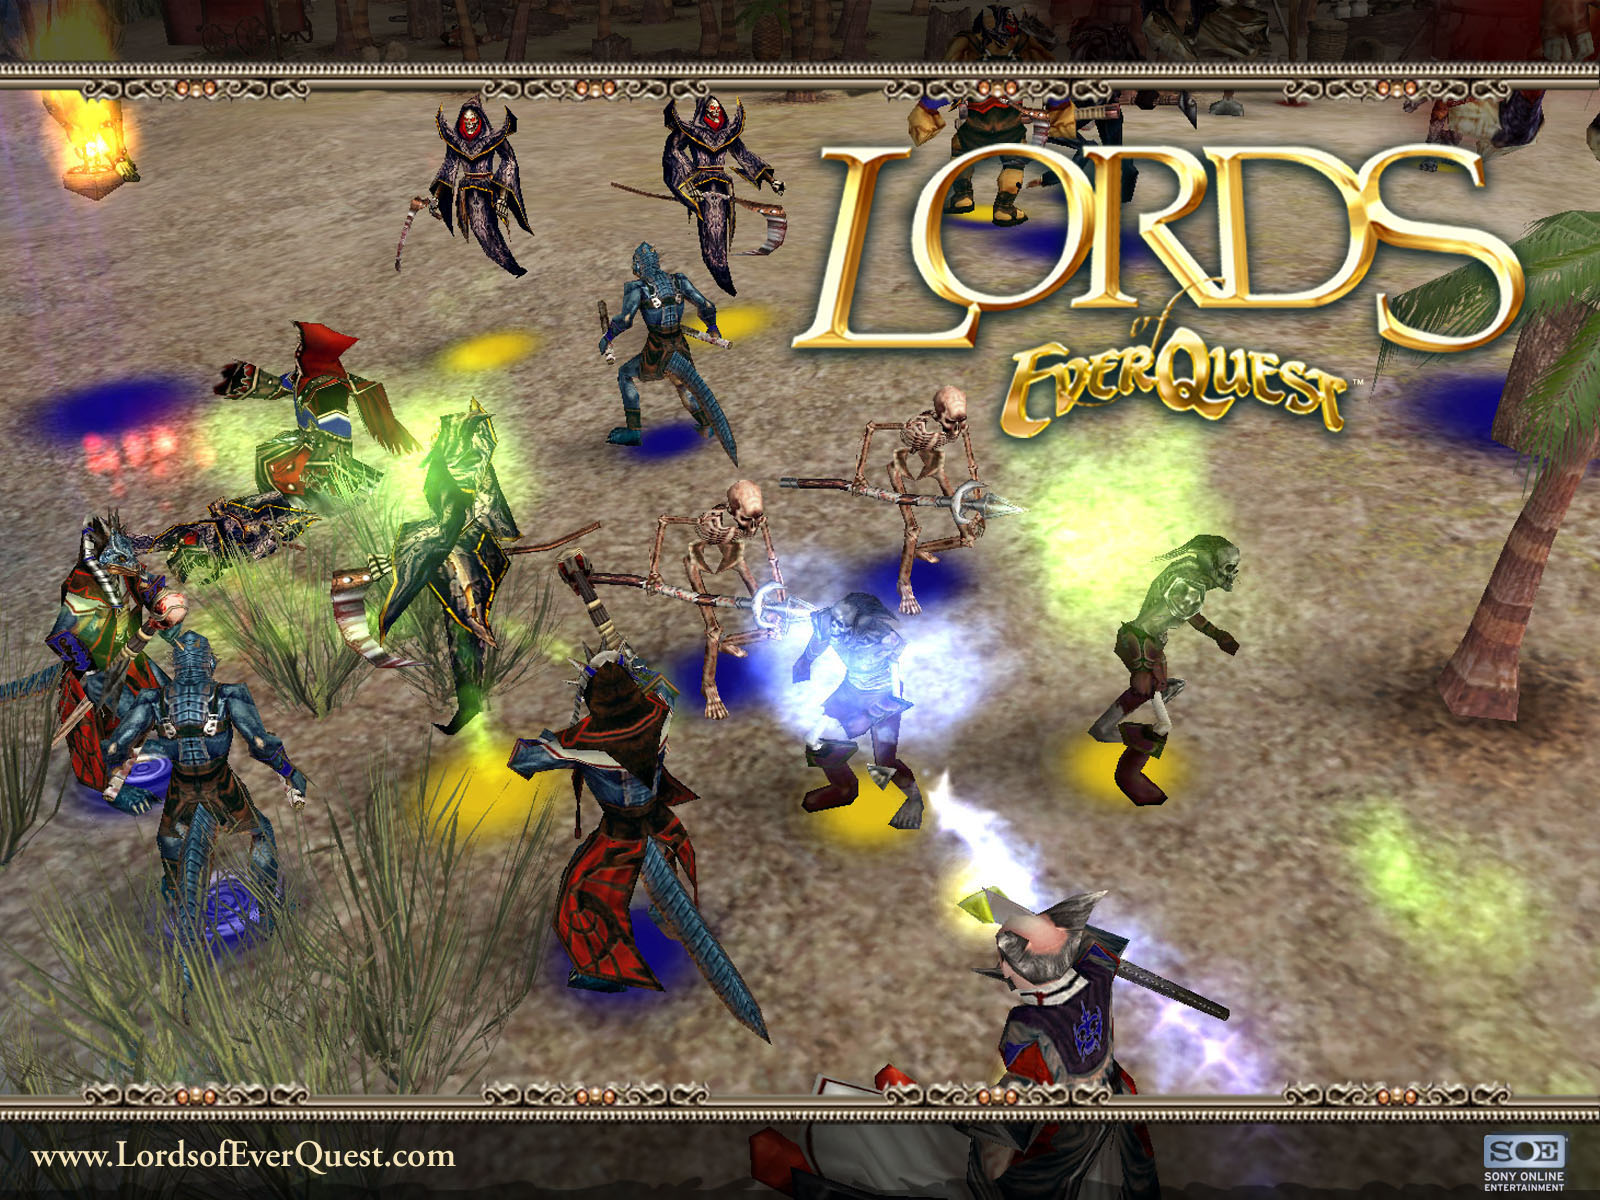 Lord of everquest steam фото 25